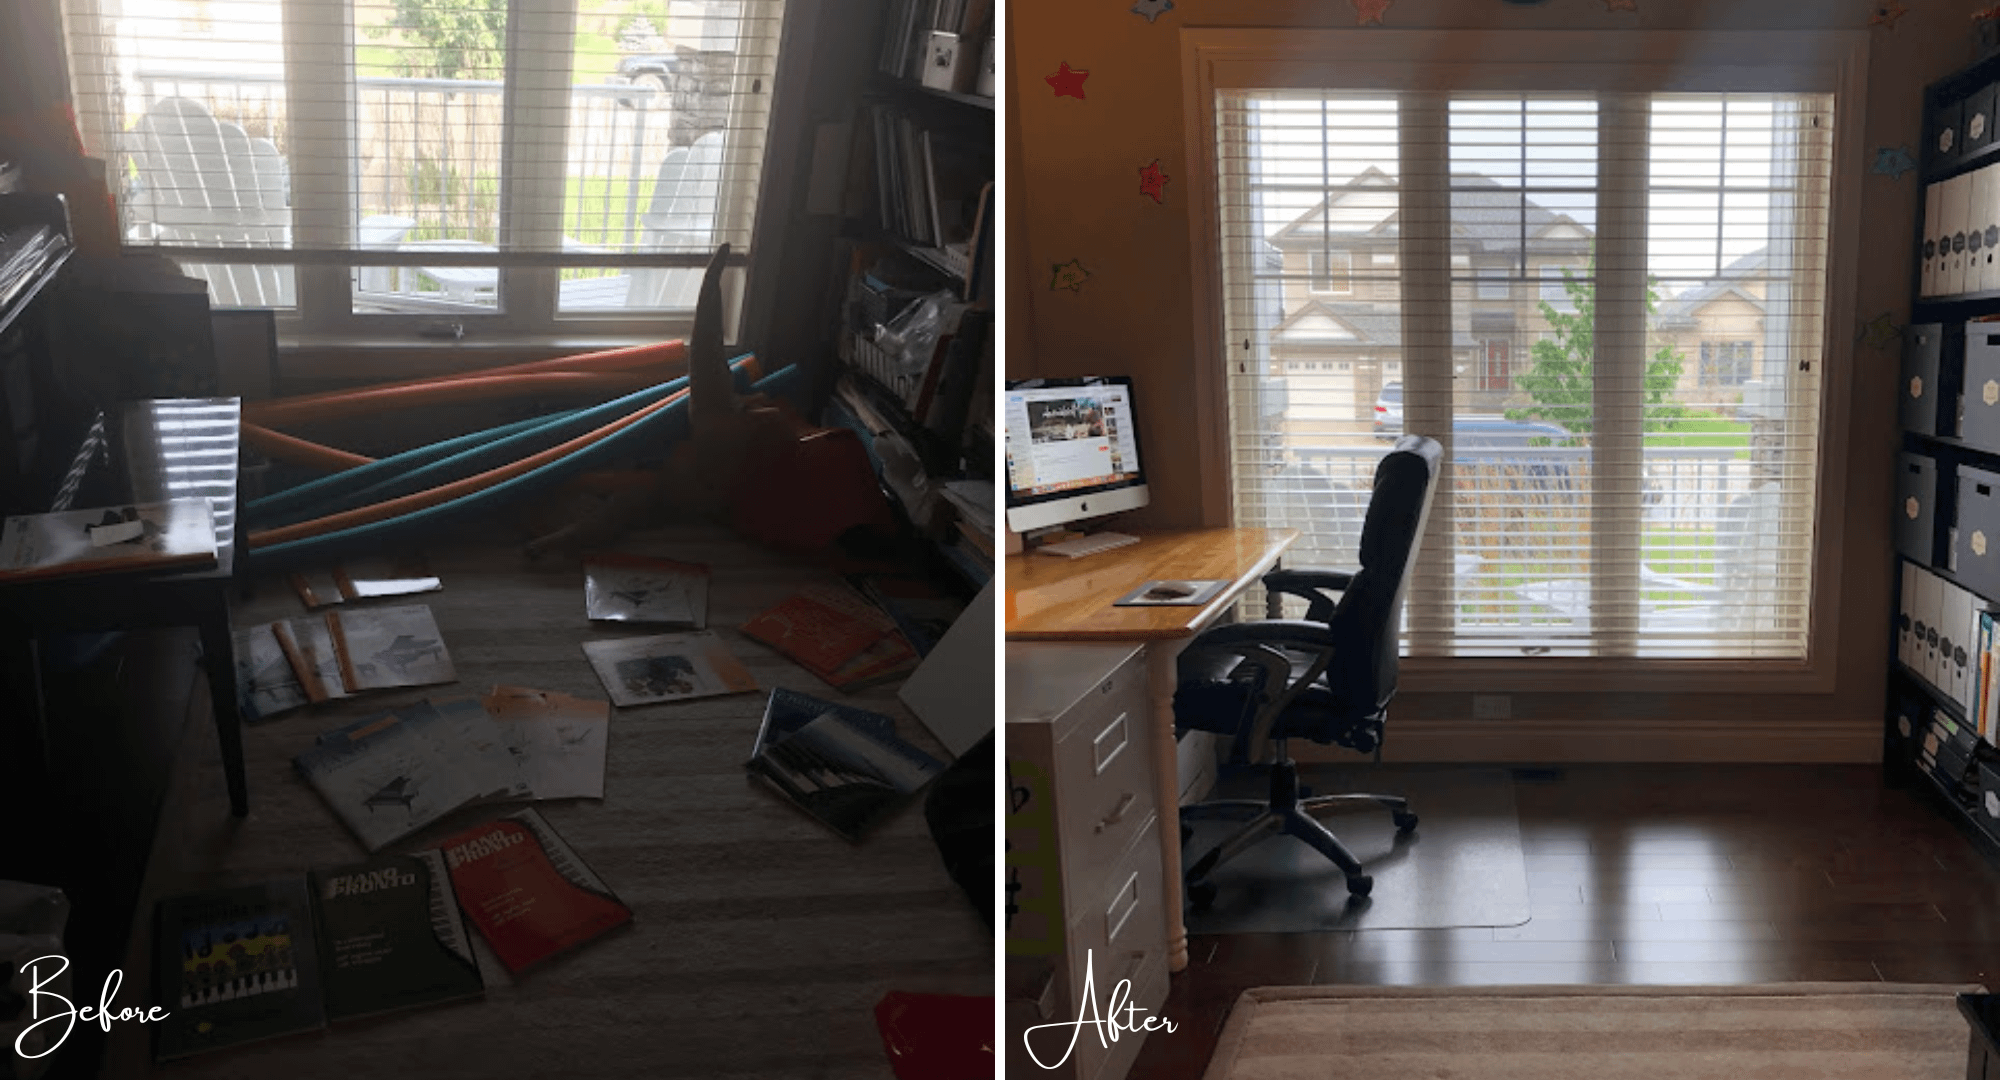 Before and after - the view from the other side of the piano room